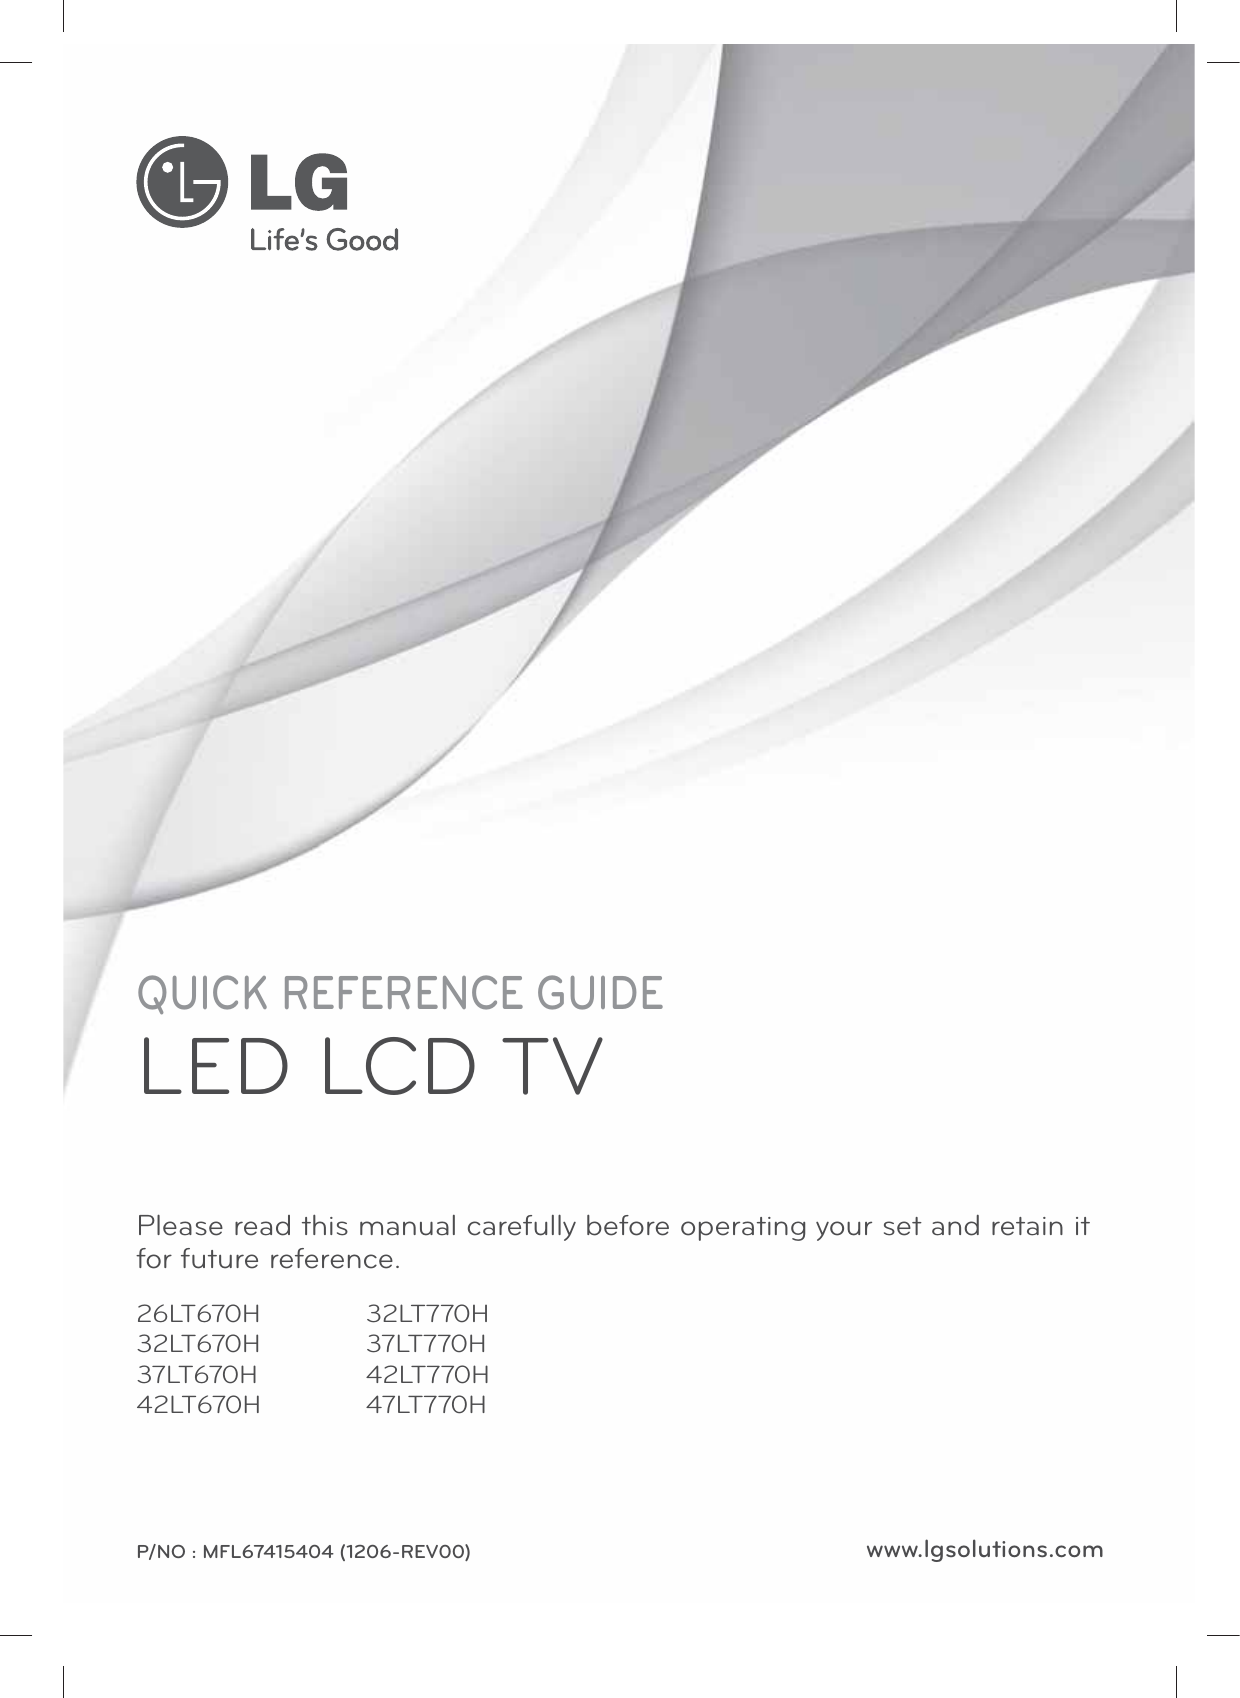 www.lgsolutions.comQUICK REFERENCE GUIDELED LCD TVPlease read this manual carefully before operating your set and retain it for future reference.P/NO : MFL67415404 (1206-REV00)26LT670H32LT670H37LT670H42LT670H32LT770H37LT770H42LT770H47LT770H